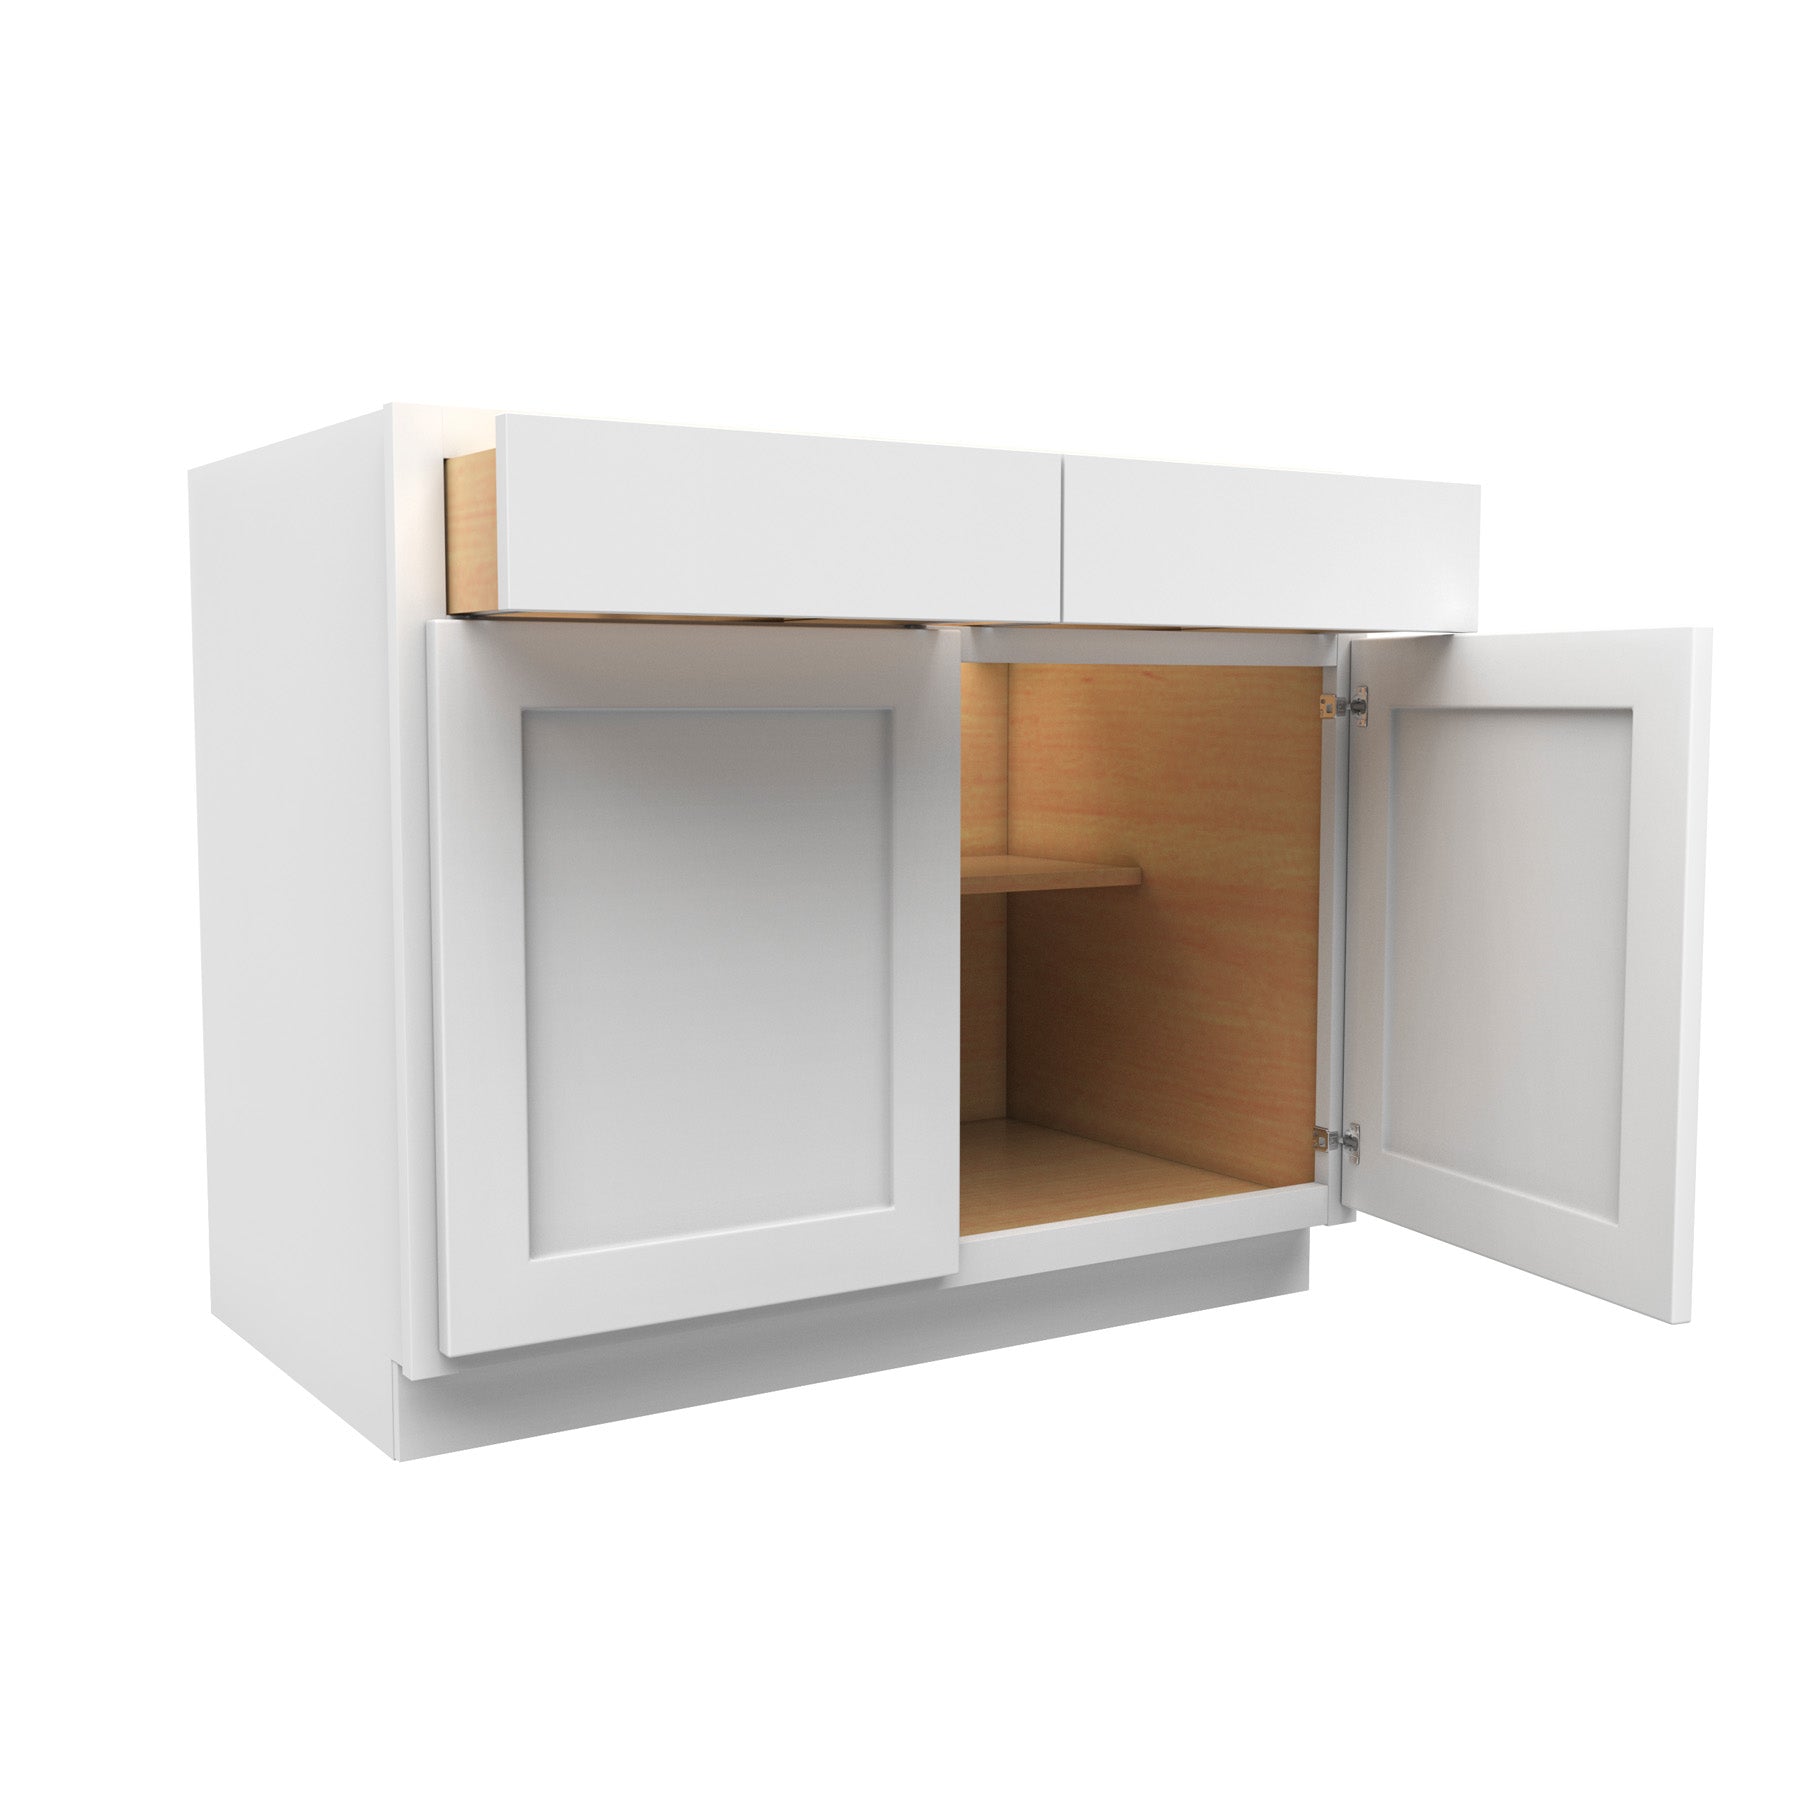 42 Inch Wide Double Door Base Cabinet - Luxor White Shaker - Ready To Assemble, 42"W x 34.5"H x 24"D